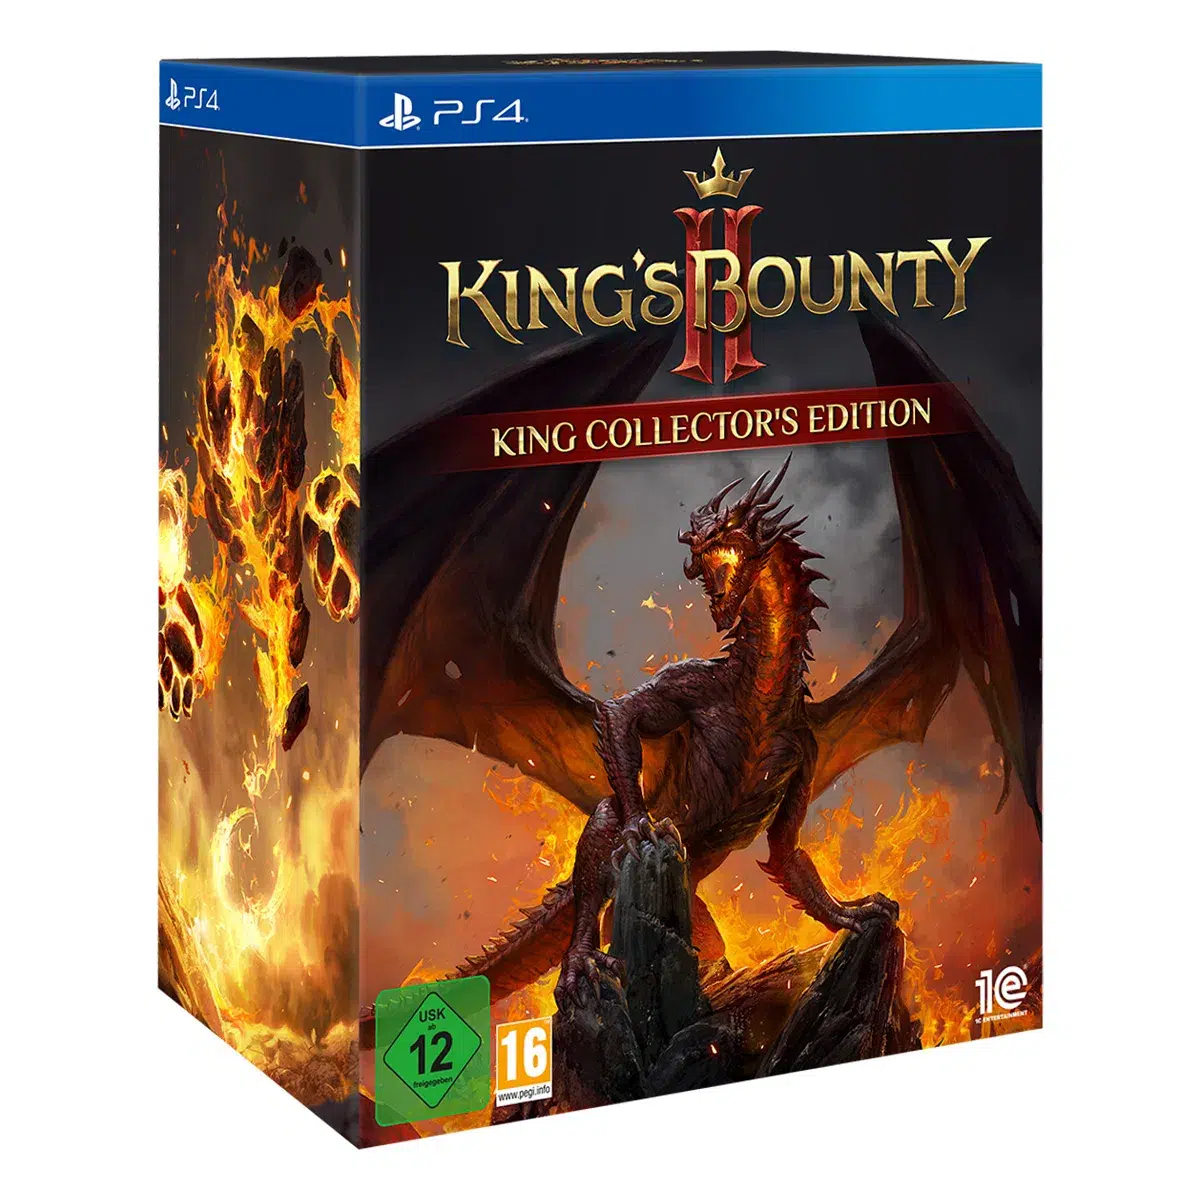 King's Bounty II King Collector's Edition (PS4)